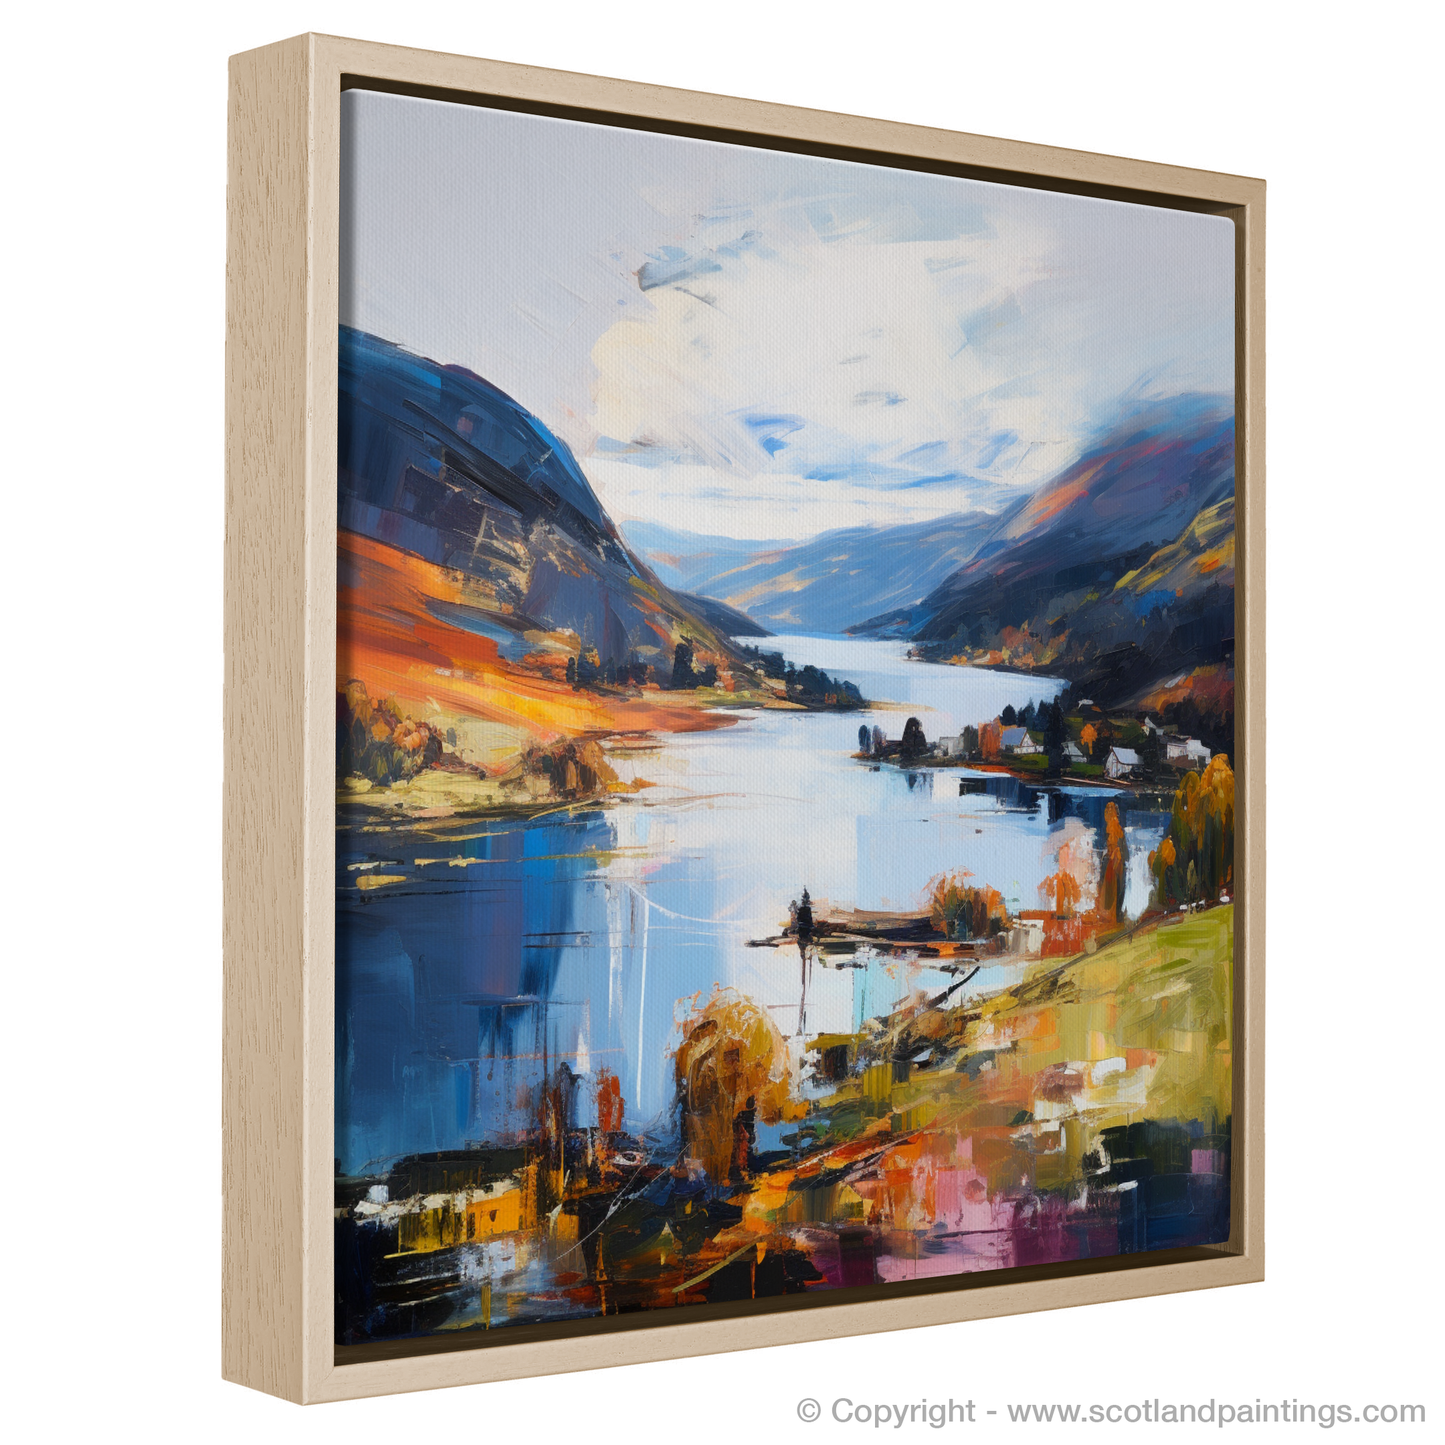 Painting and Art Print of Loch Earn, Perth and Kinross entitled "Highland Rhapsody: An Expressionist Ode to Loch Earn".